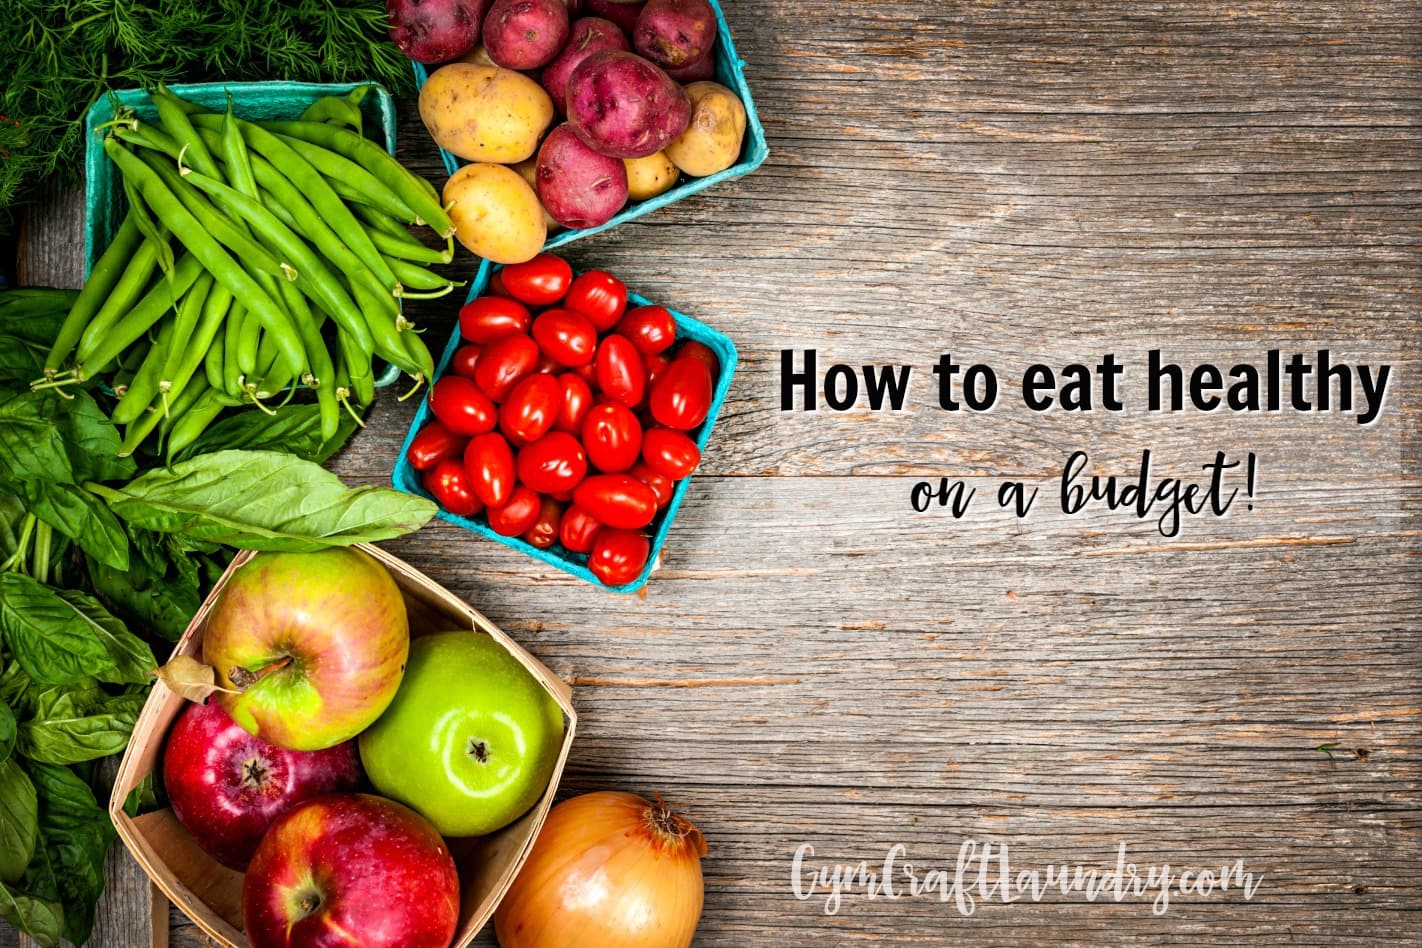 Healthy foods to prioritize on a budget